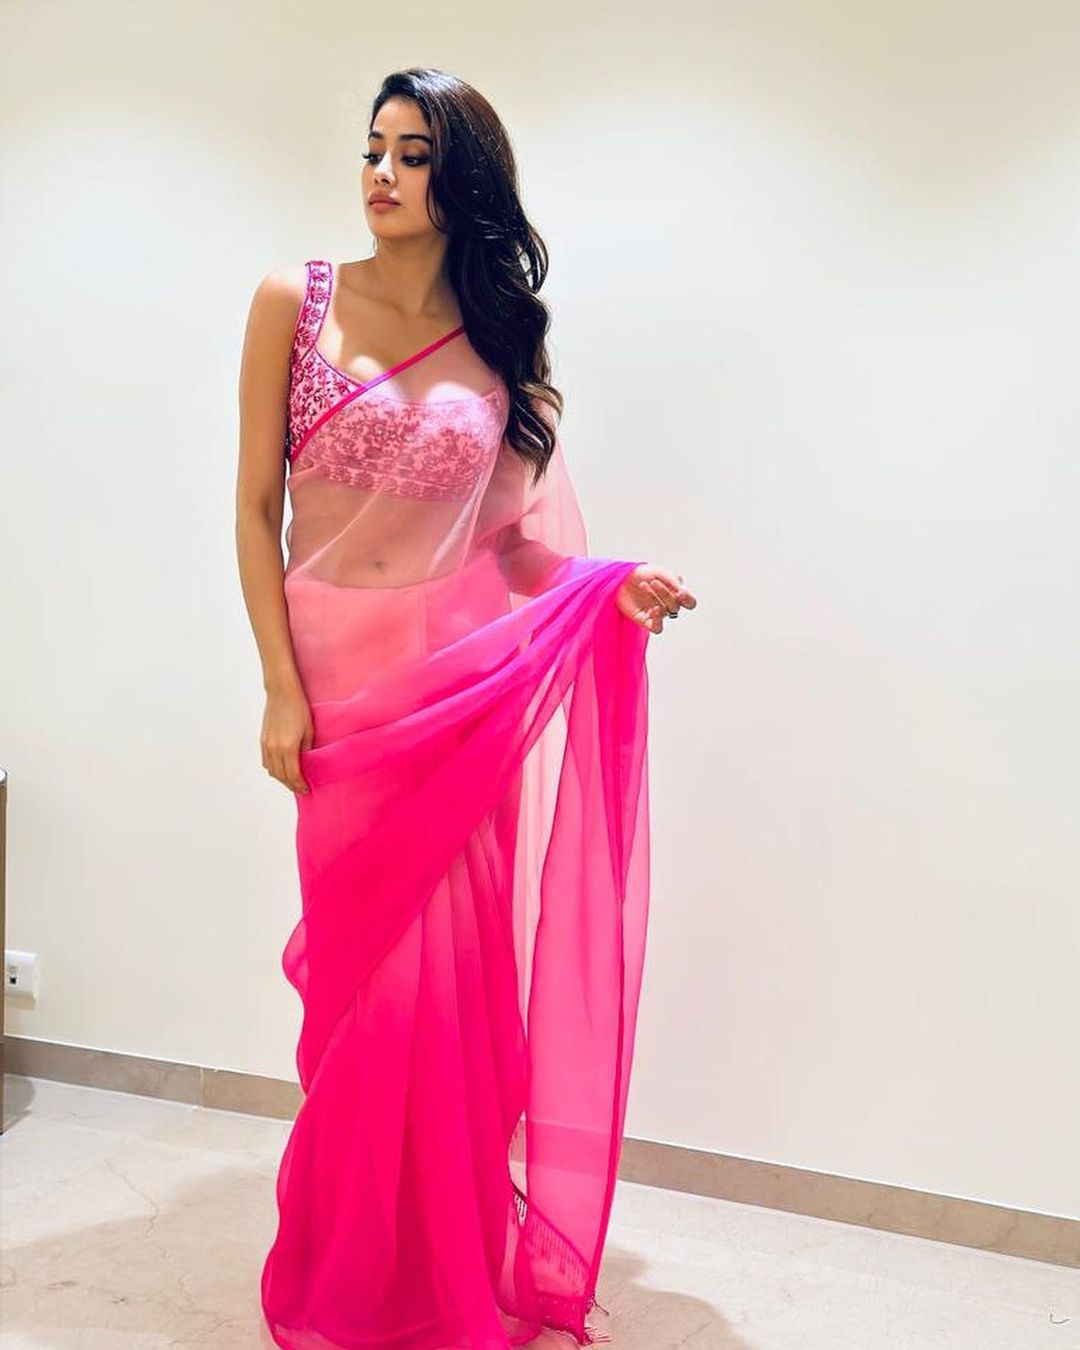 Janhvi Kapoor Is A Sight To Behold In Pink Semi-sheer Saree With ...